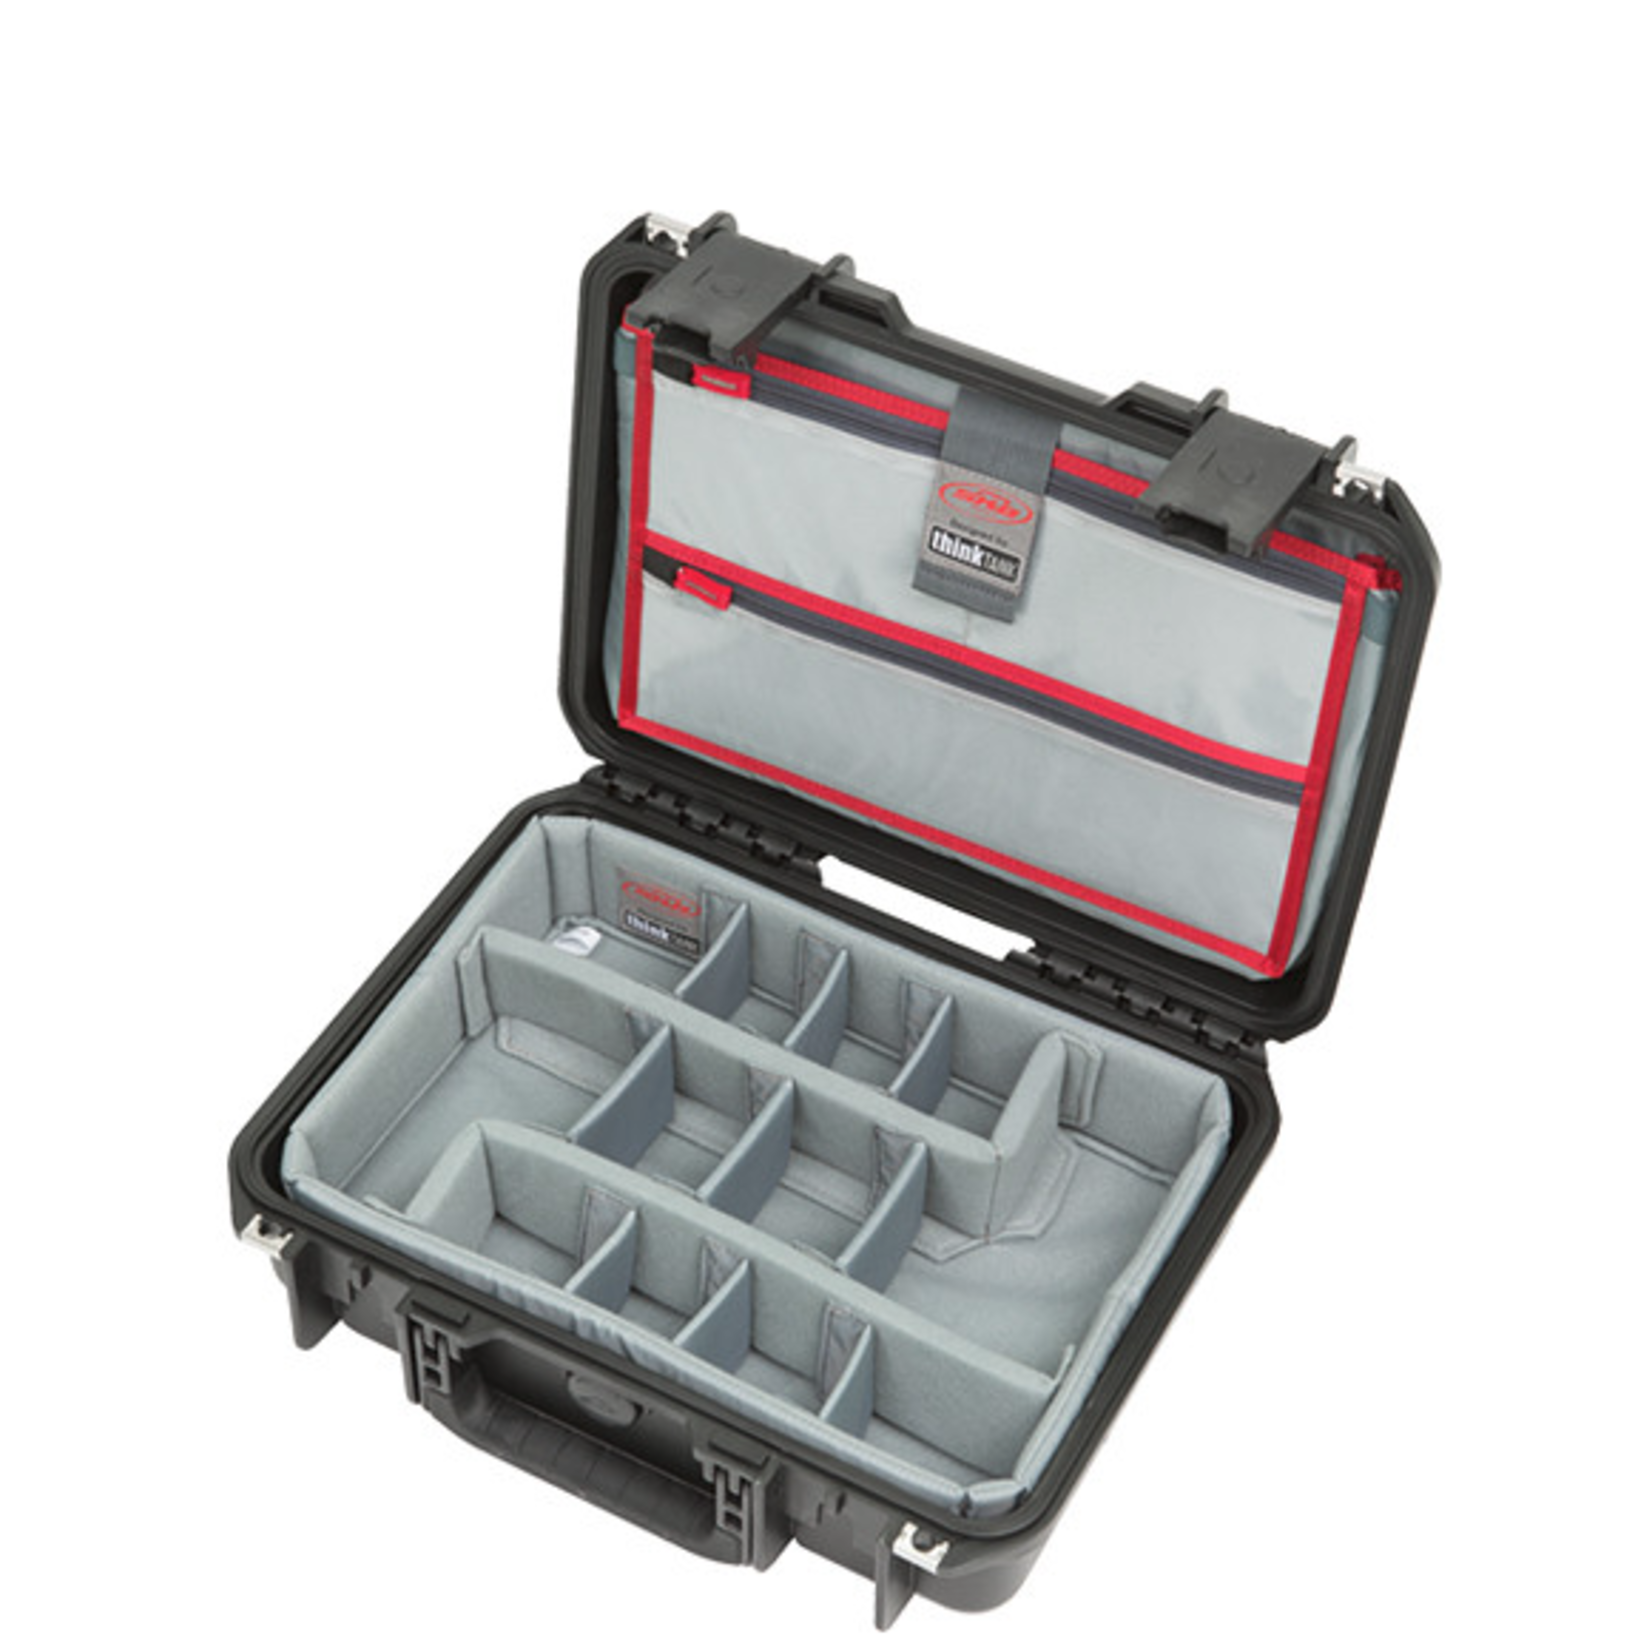 SKB Cases SKB iSeries 1510-4 Case with Think Tank Photo Dividers & Lid Organizer (Black)